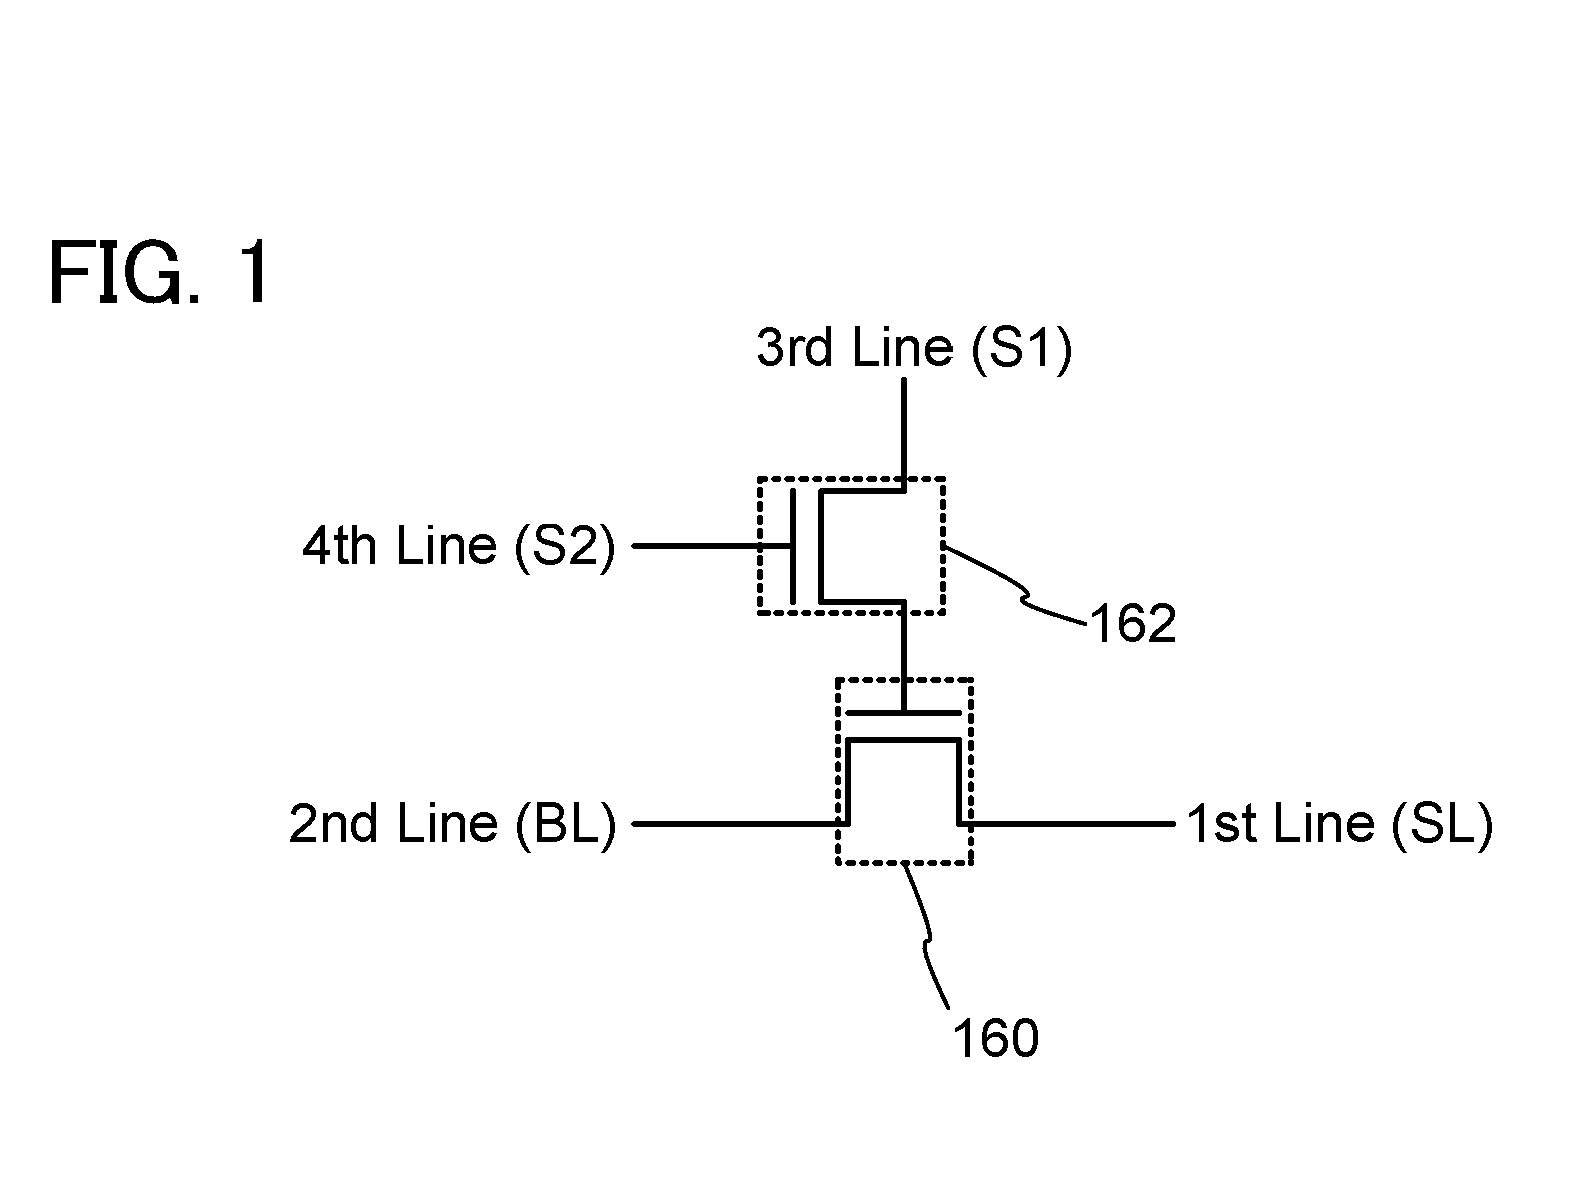 Oxide-based thin-film transistor (TFT) semiconductor memory device having source/drain electrode of one transistor connected to gate electrode of the other